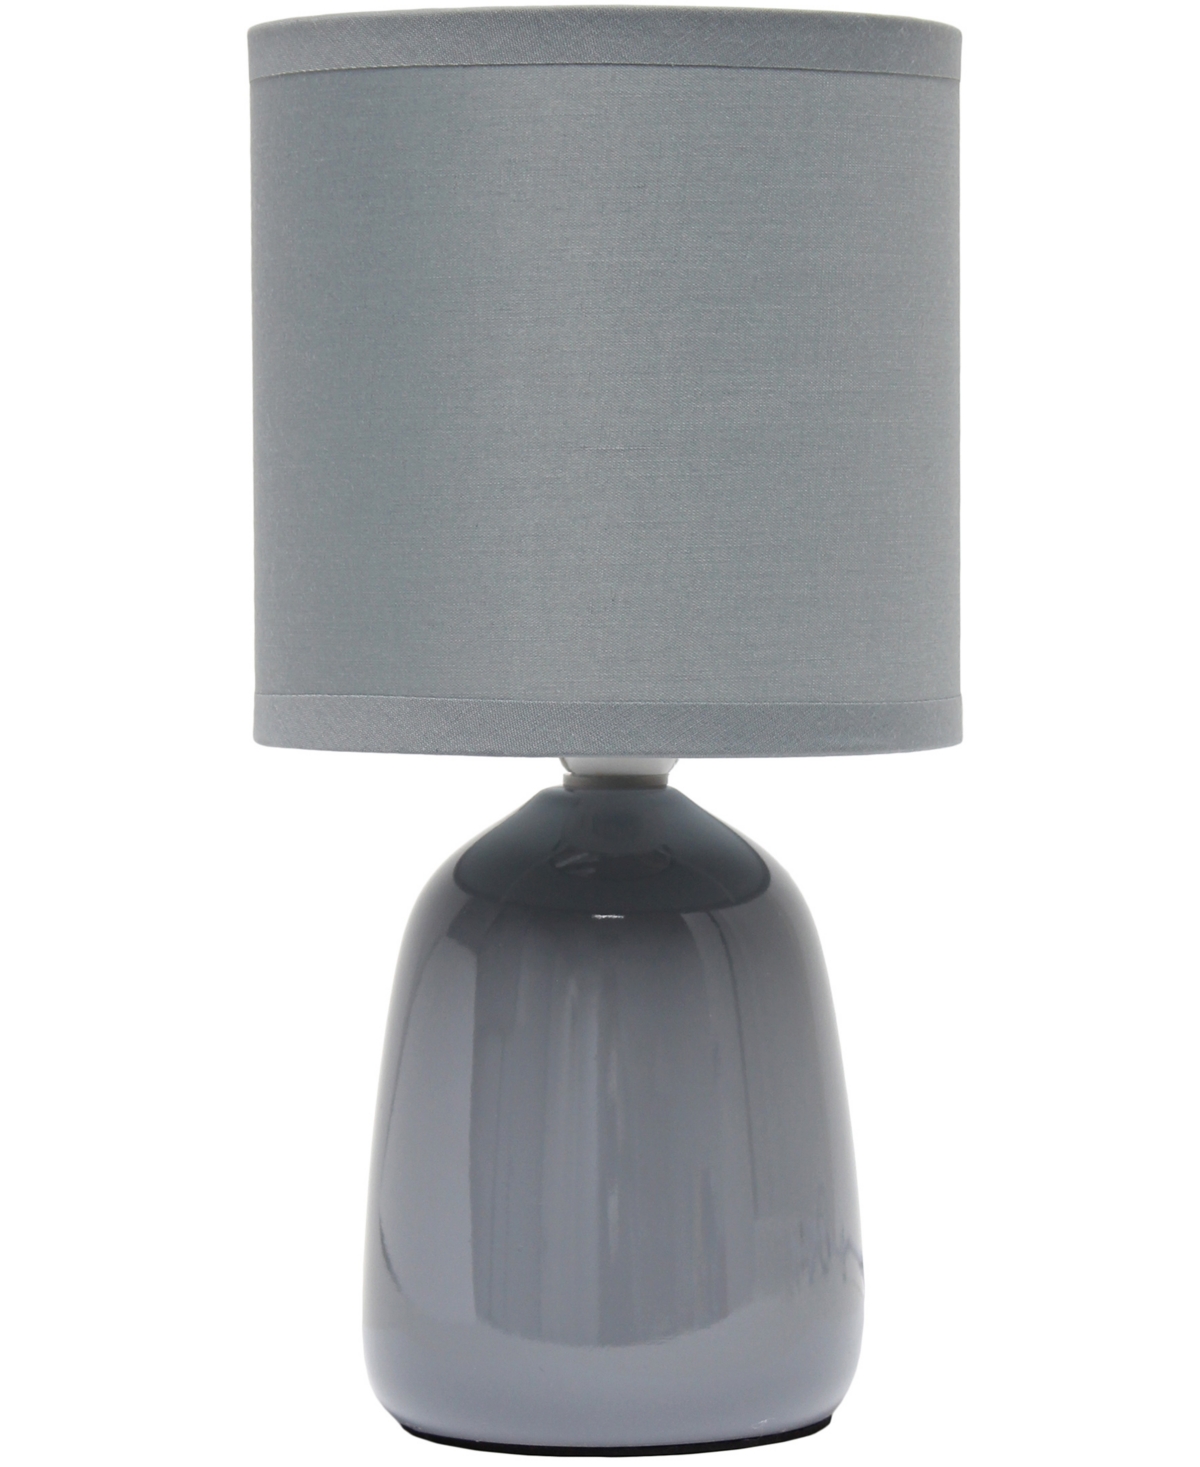 Shop Simple Designs 10.04" Tall Traditional Ceramic Thimble Base Bedside Table Desk Lamp With Matching Fabric Shade In Gray